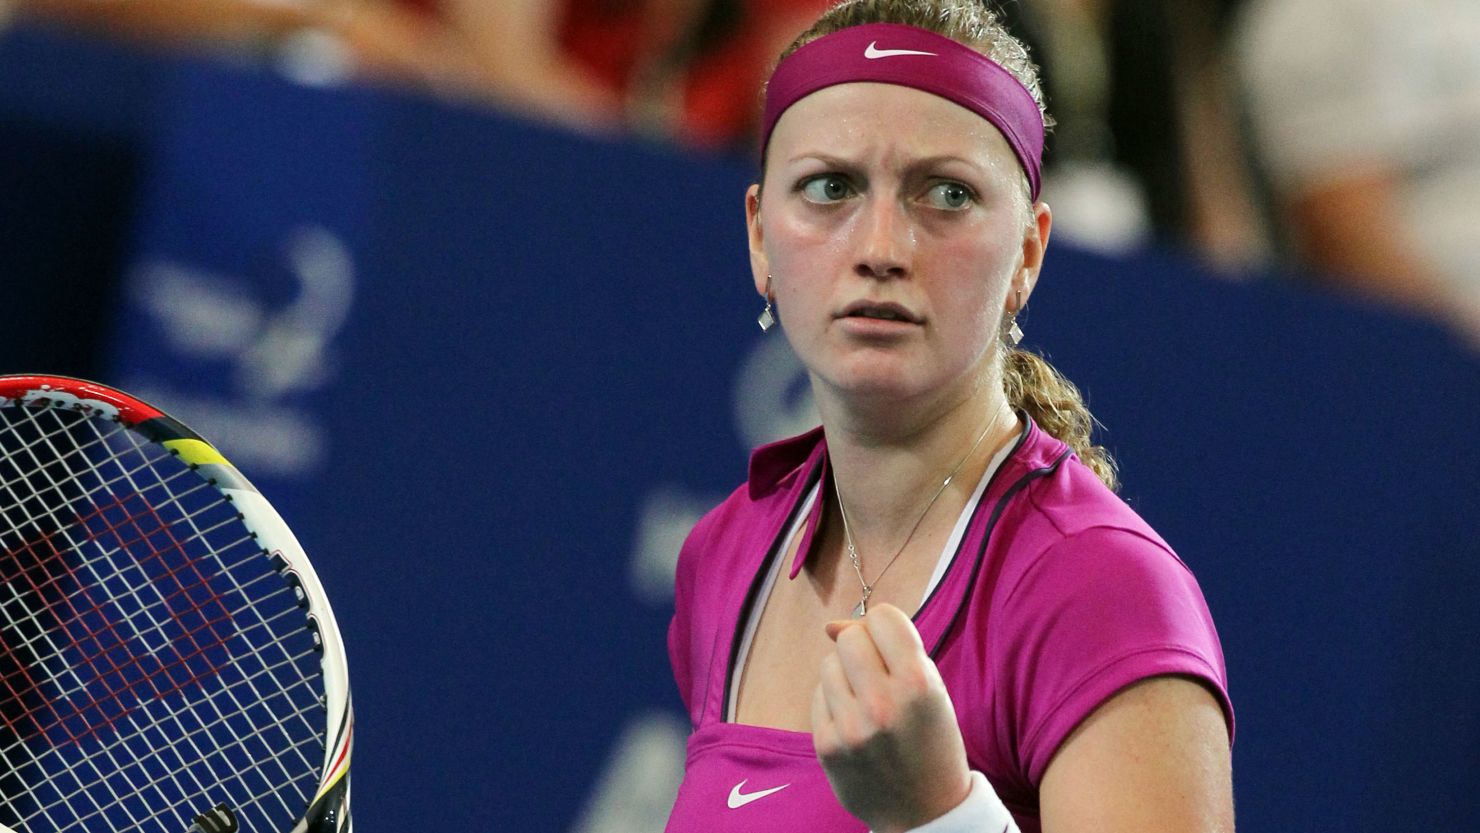 Petra Kvitova was in sparkling form on her return to action in the Hopman Cup.